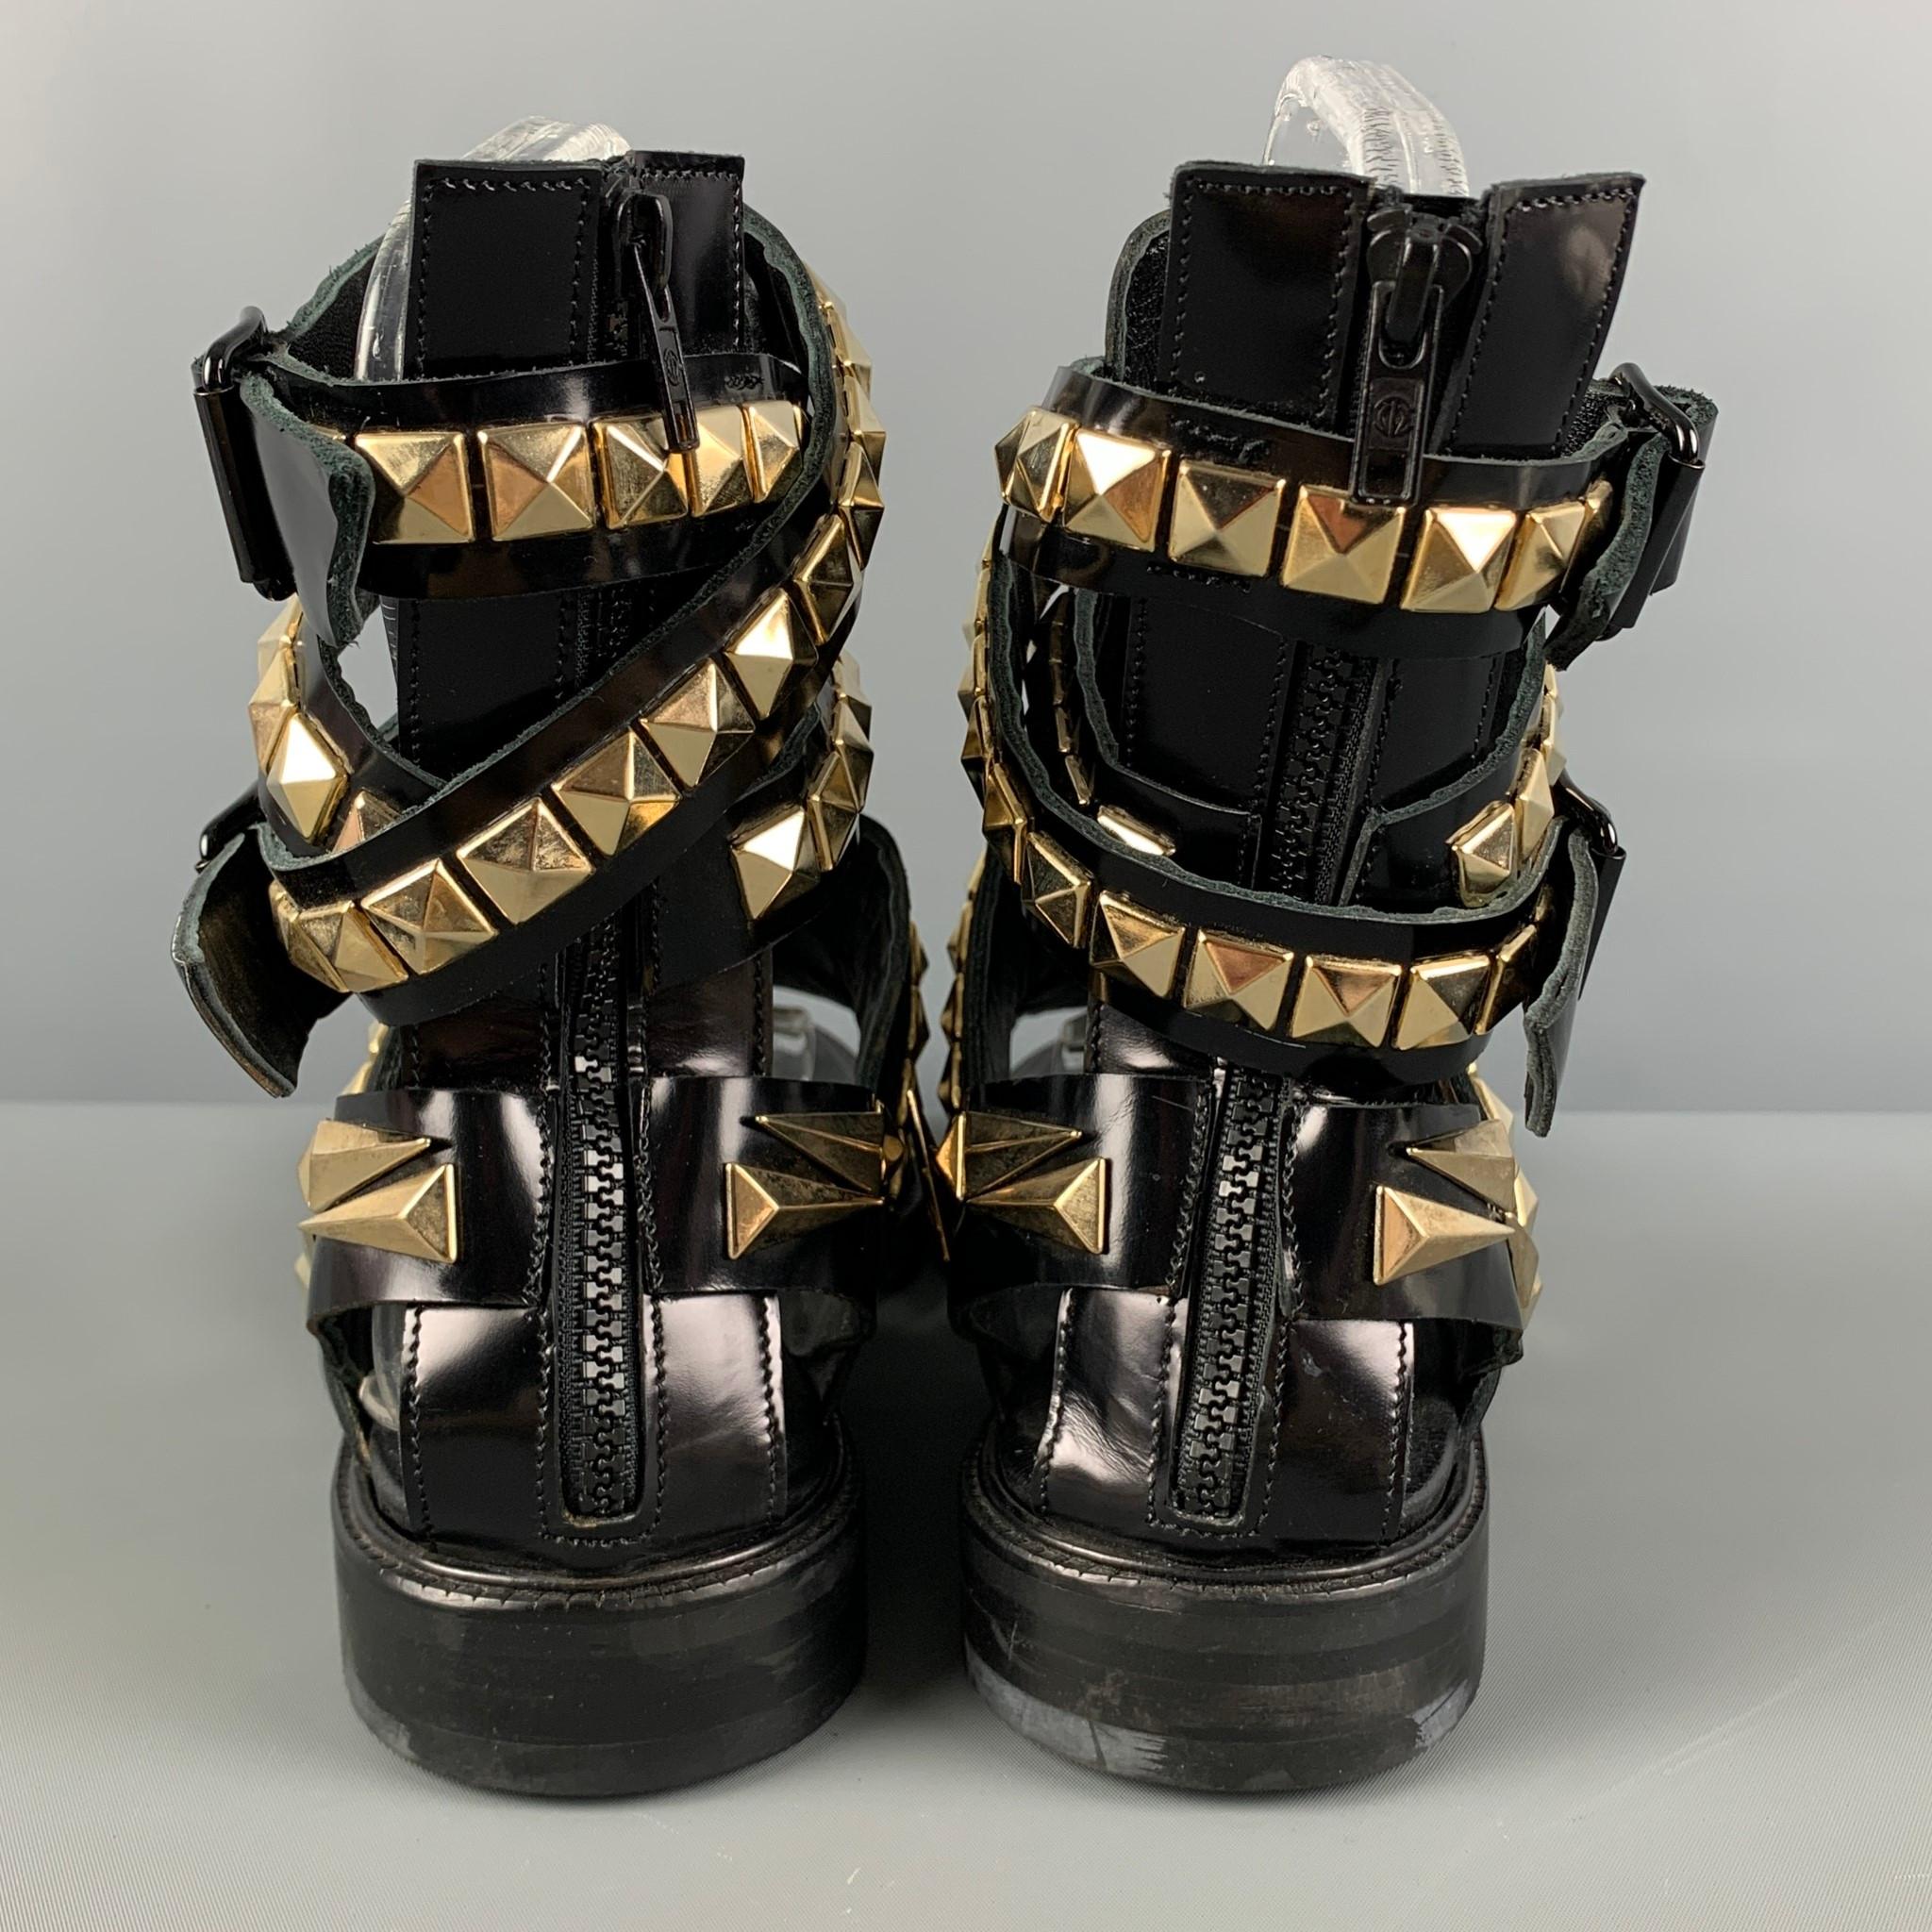 GIVENCHY SS 10 Size 11 Black Gold Studded Leather Gladiator Sandals 1